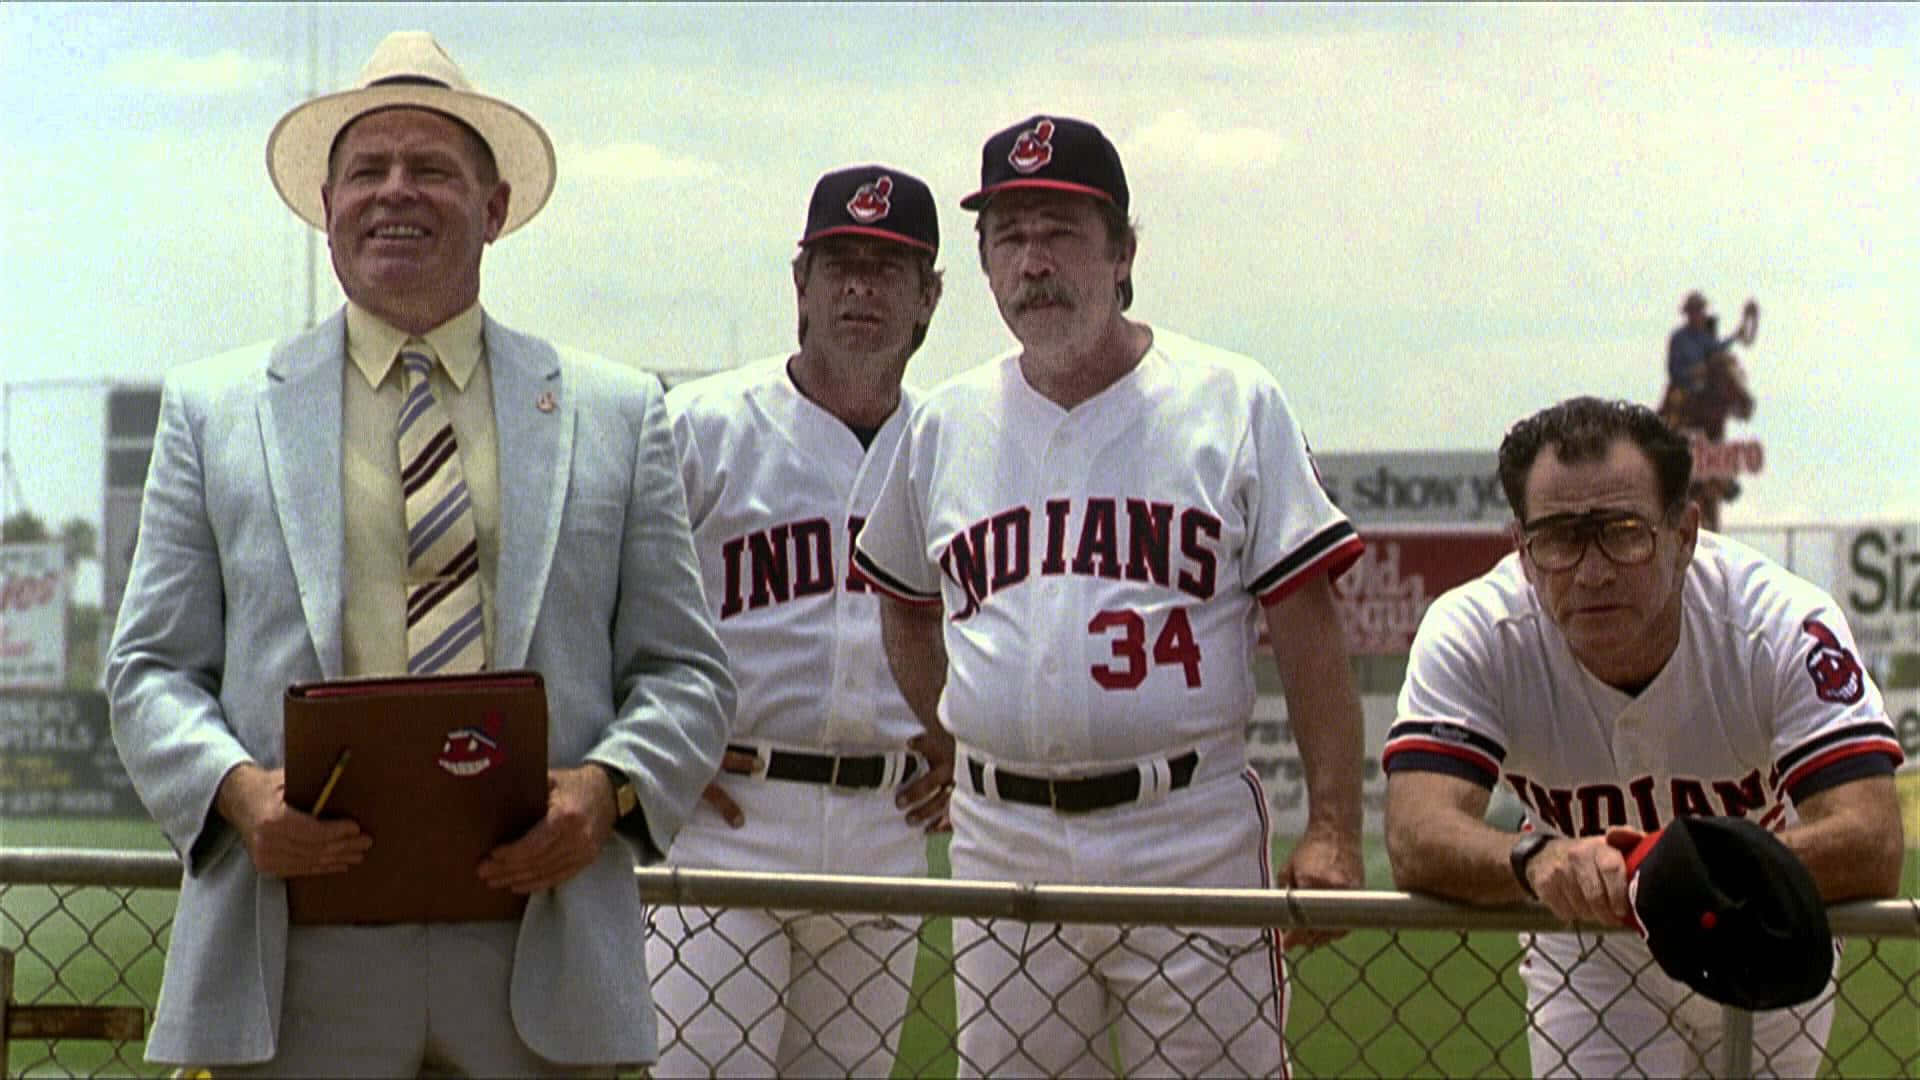 Download Major League Movie Poster featuring the main cast